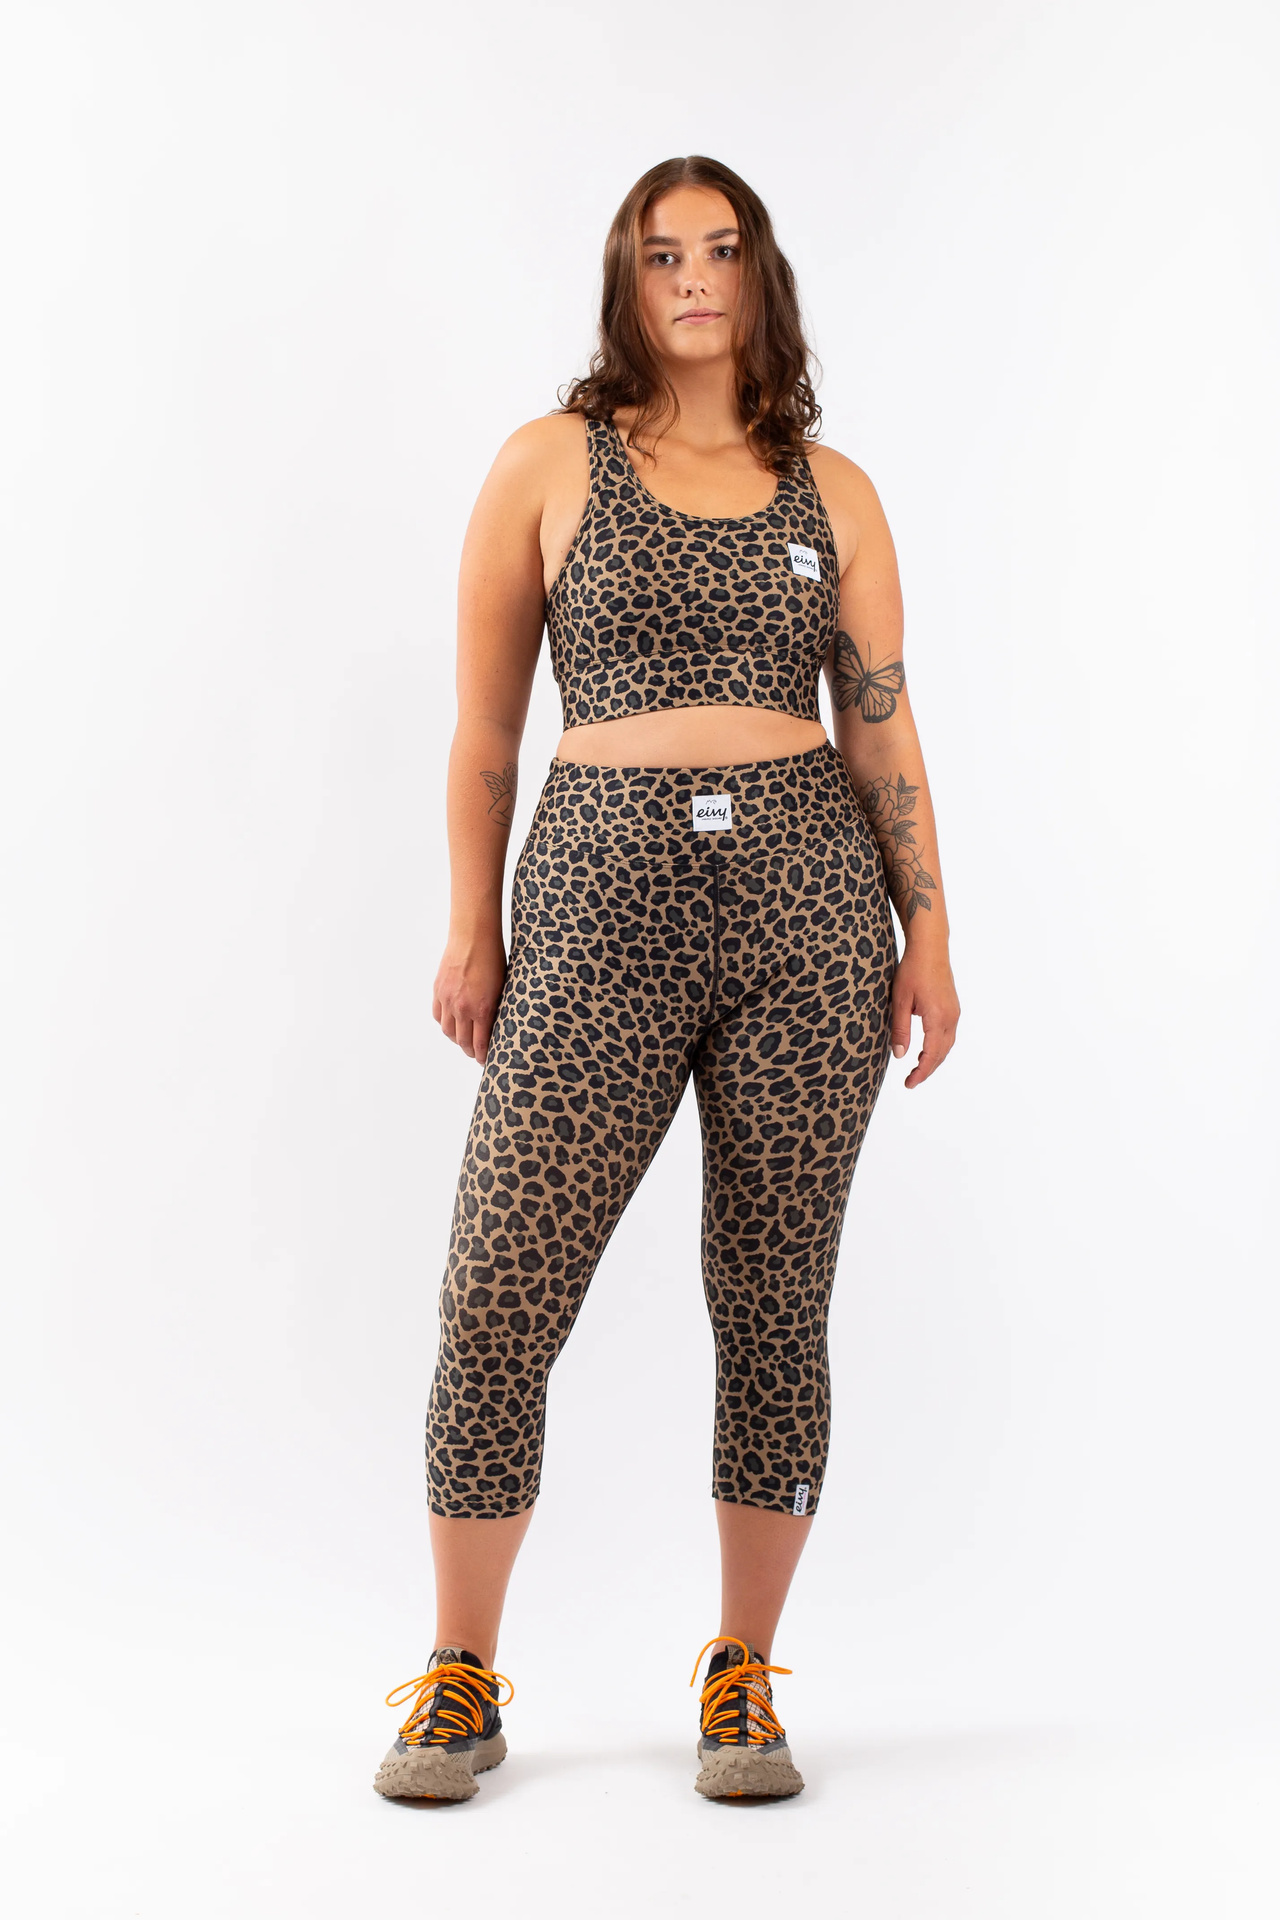 Icecold 3/4 Tights - Leopard | M